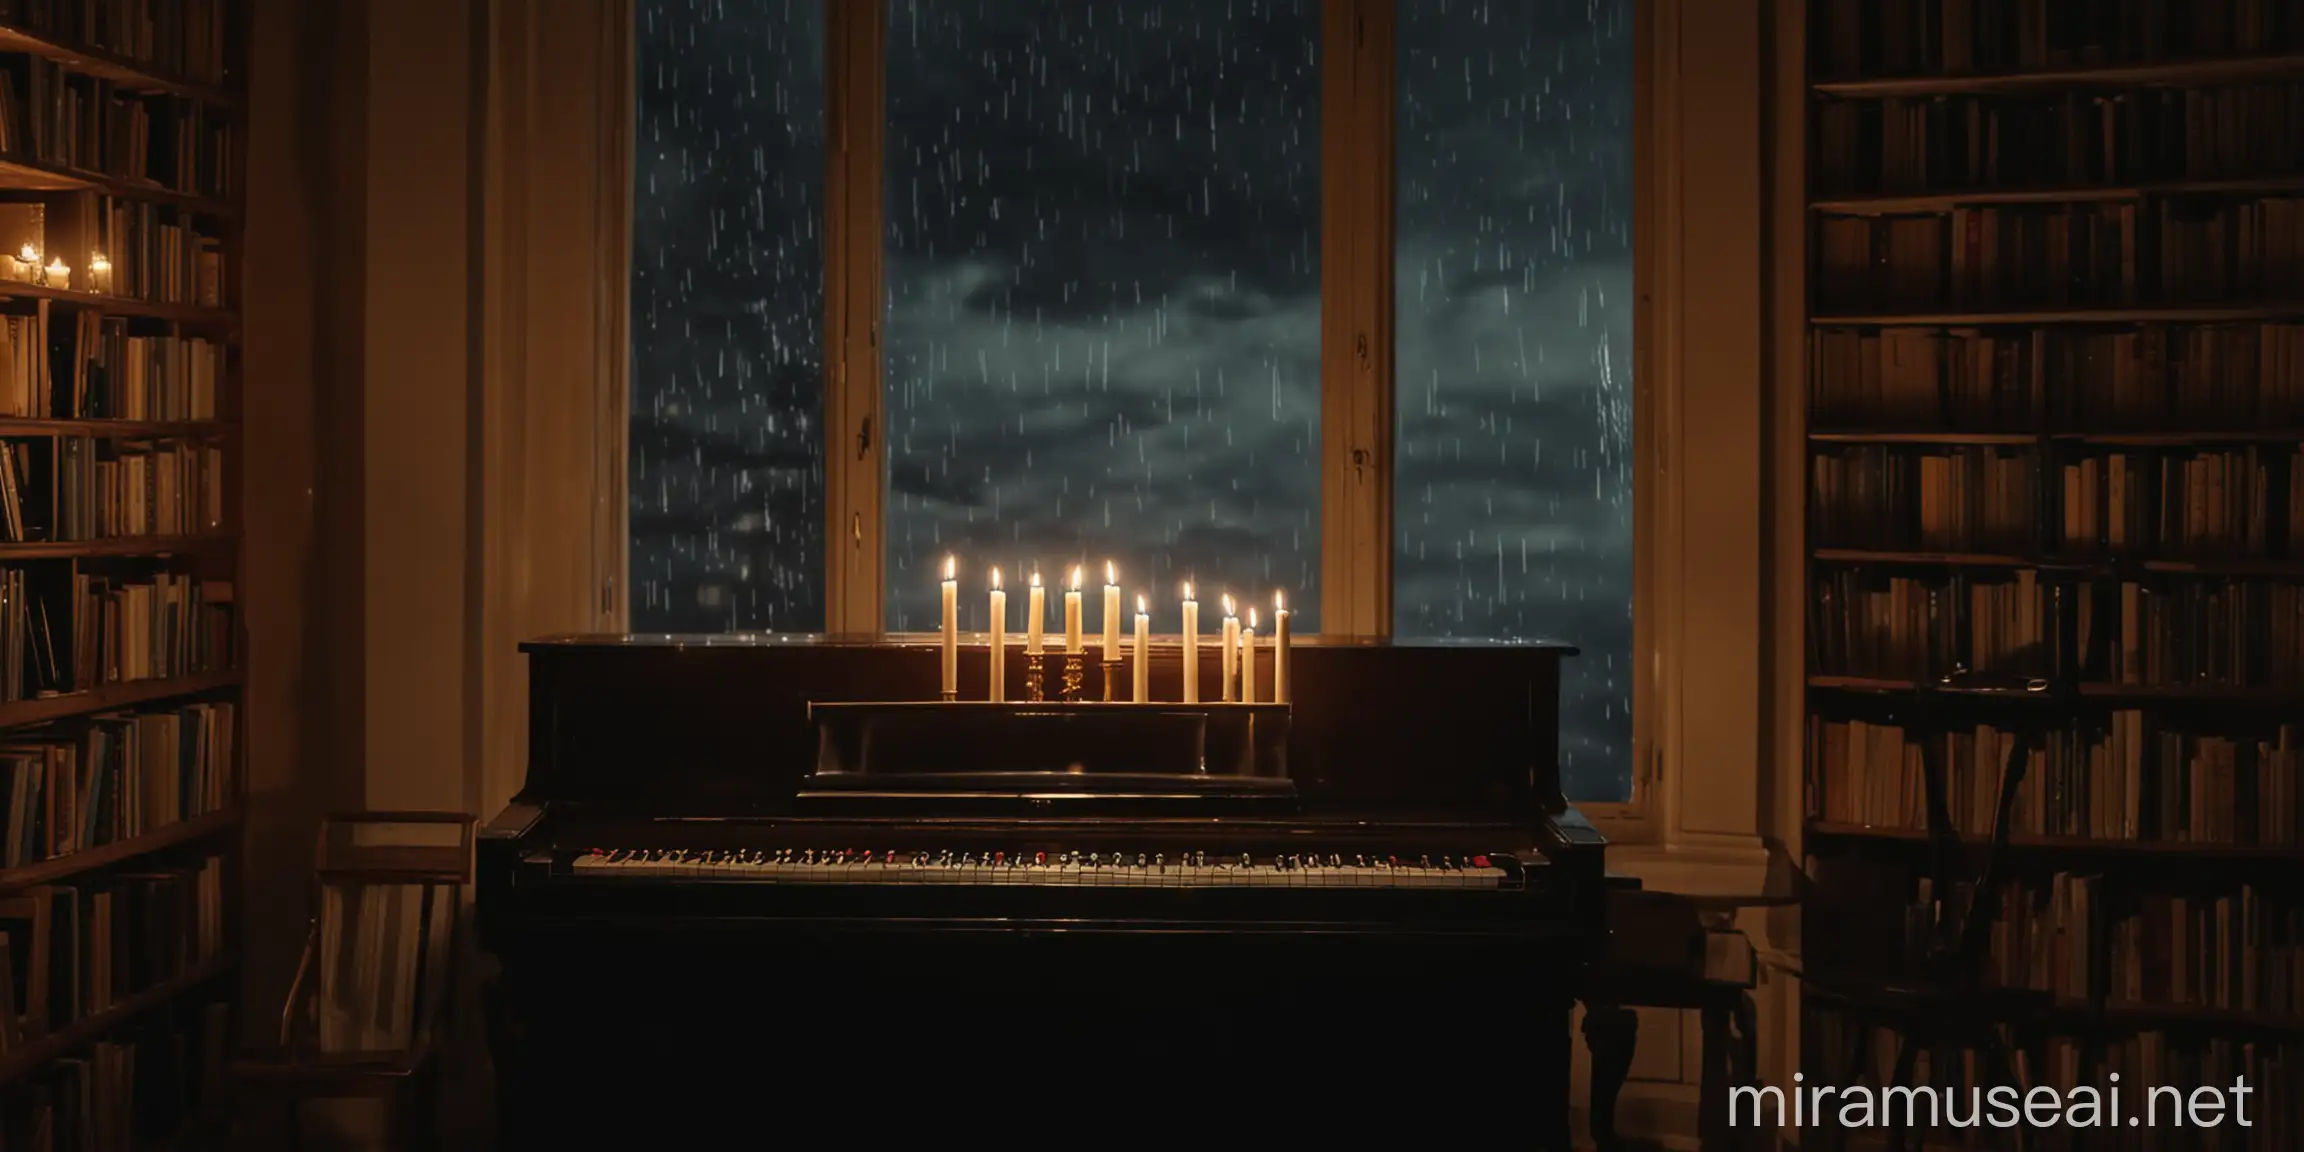 Elegant Piano Performance in Candlelit Library with Stormy Night View